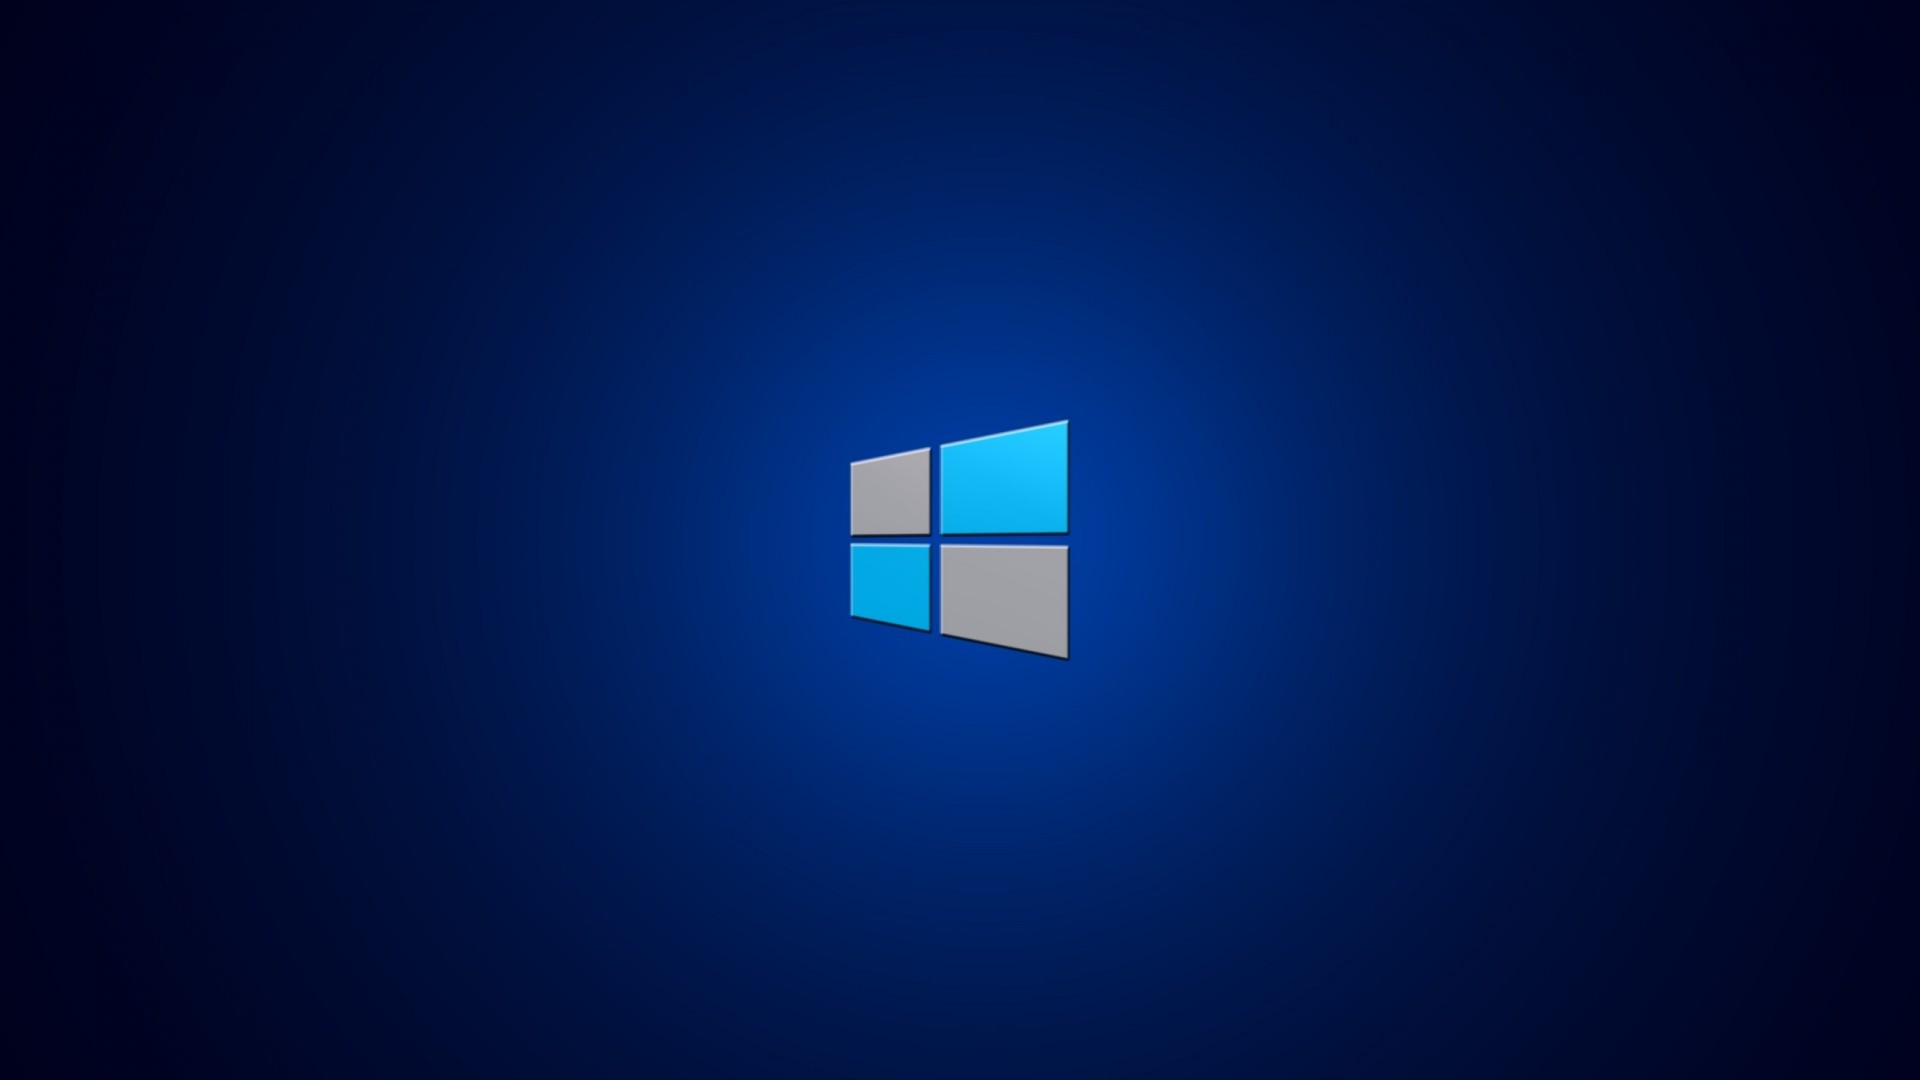 Two Blue Windows   HD Wallpapers